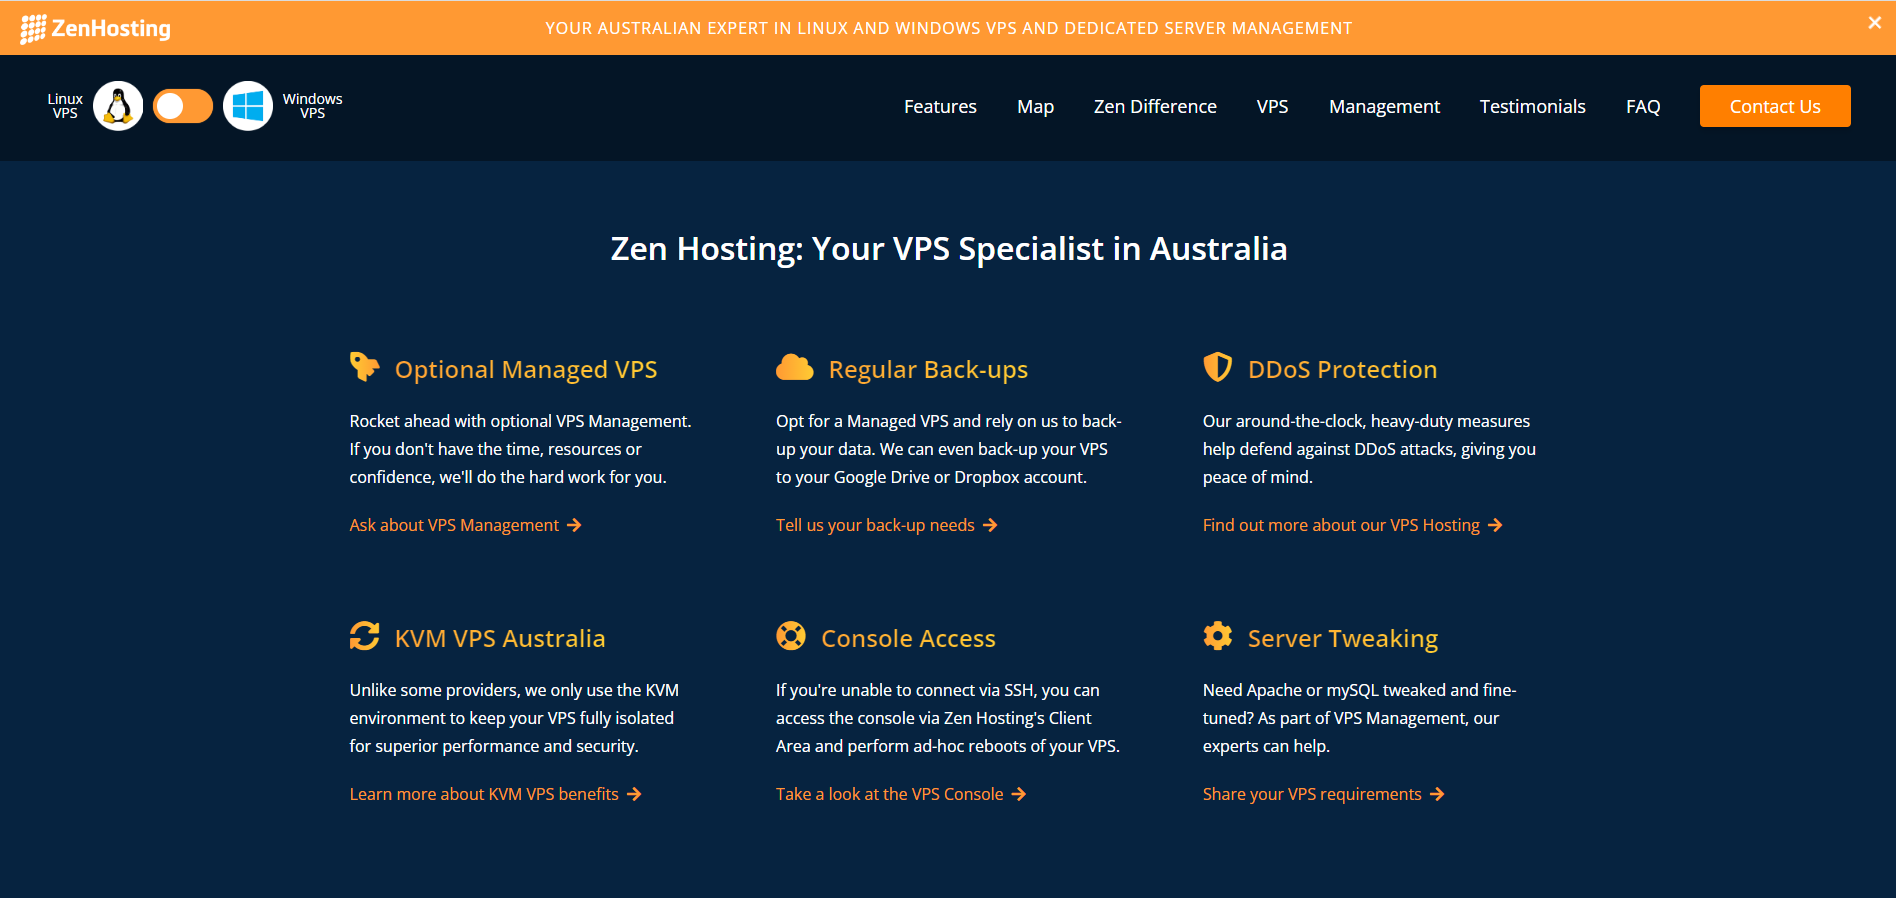 Listed VPS hosting features by Zen Hosting